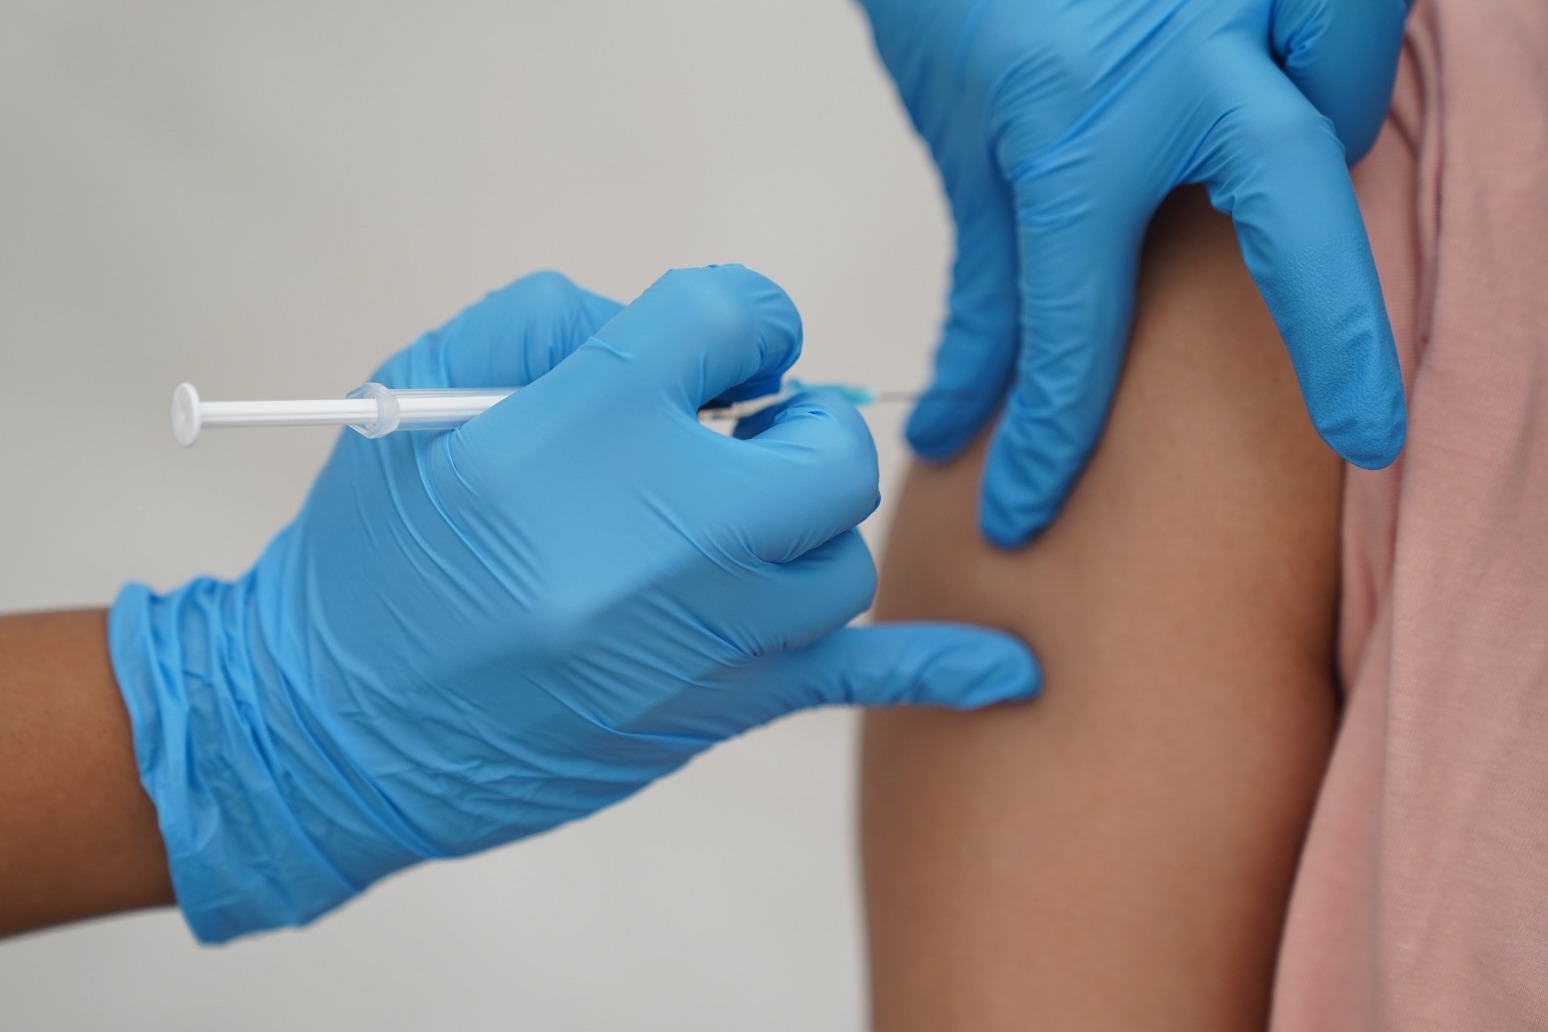 Government report calls for NHS to ‘redouble’ efforts to vaccinate vulnerable 